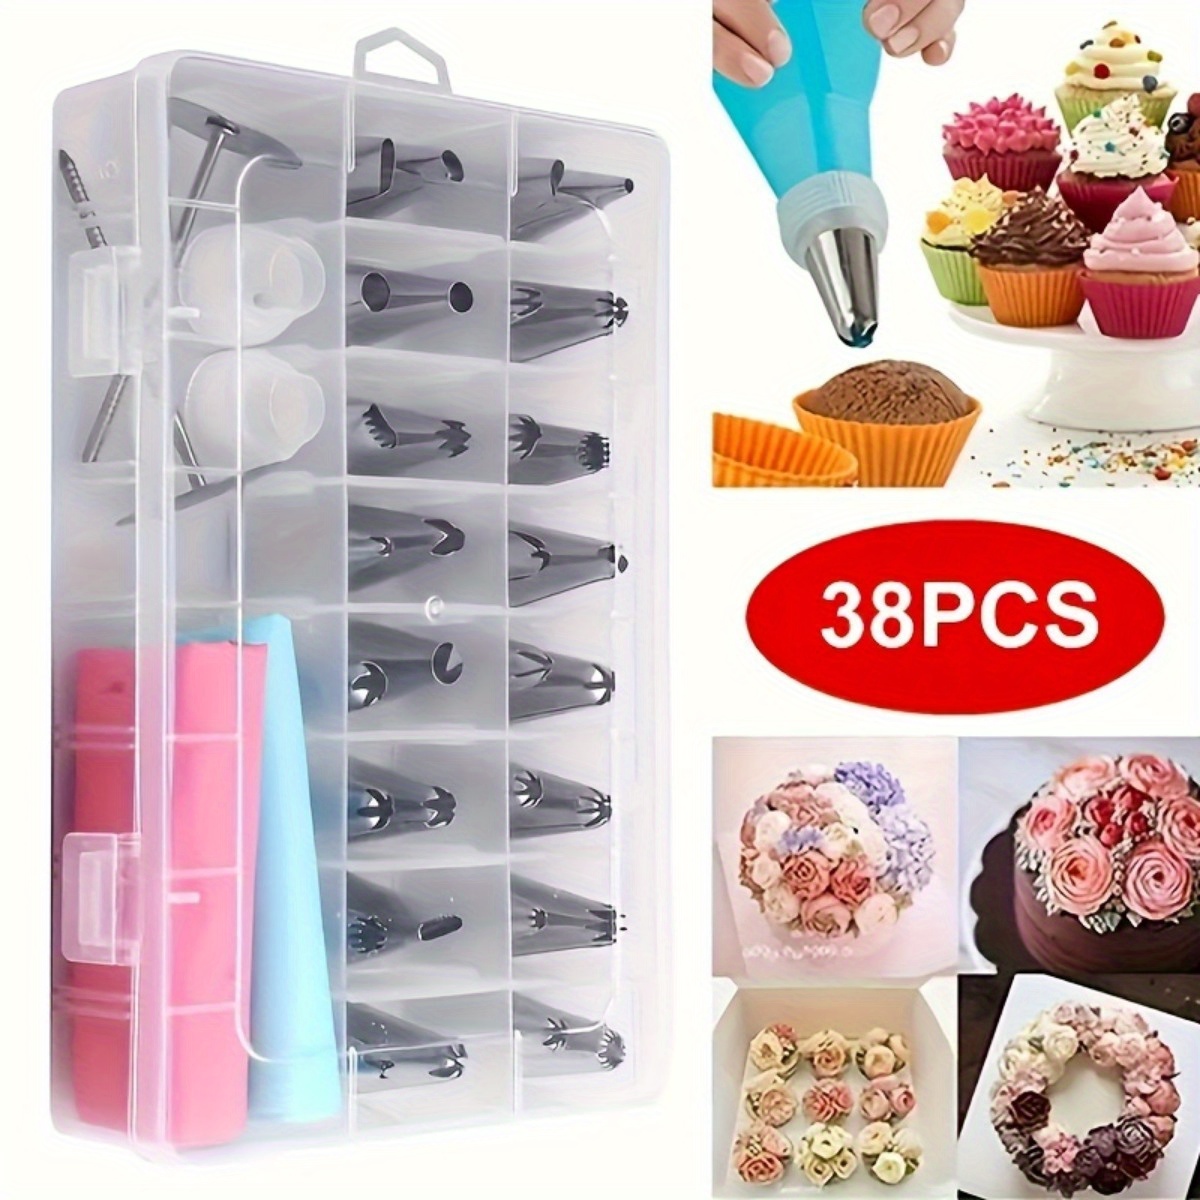 

38pcs Stainless Steel Icing & Piping Tips Set With Storage Box - Includes 32 Icing Nozzles, 2 Converters, 2 Flower Nails, 2 Piping Bags For Cake Decorating, Cupcake, Baking Tools And Kitchen Gadgets